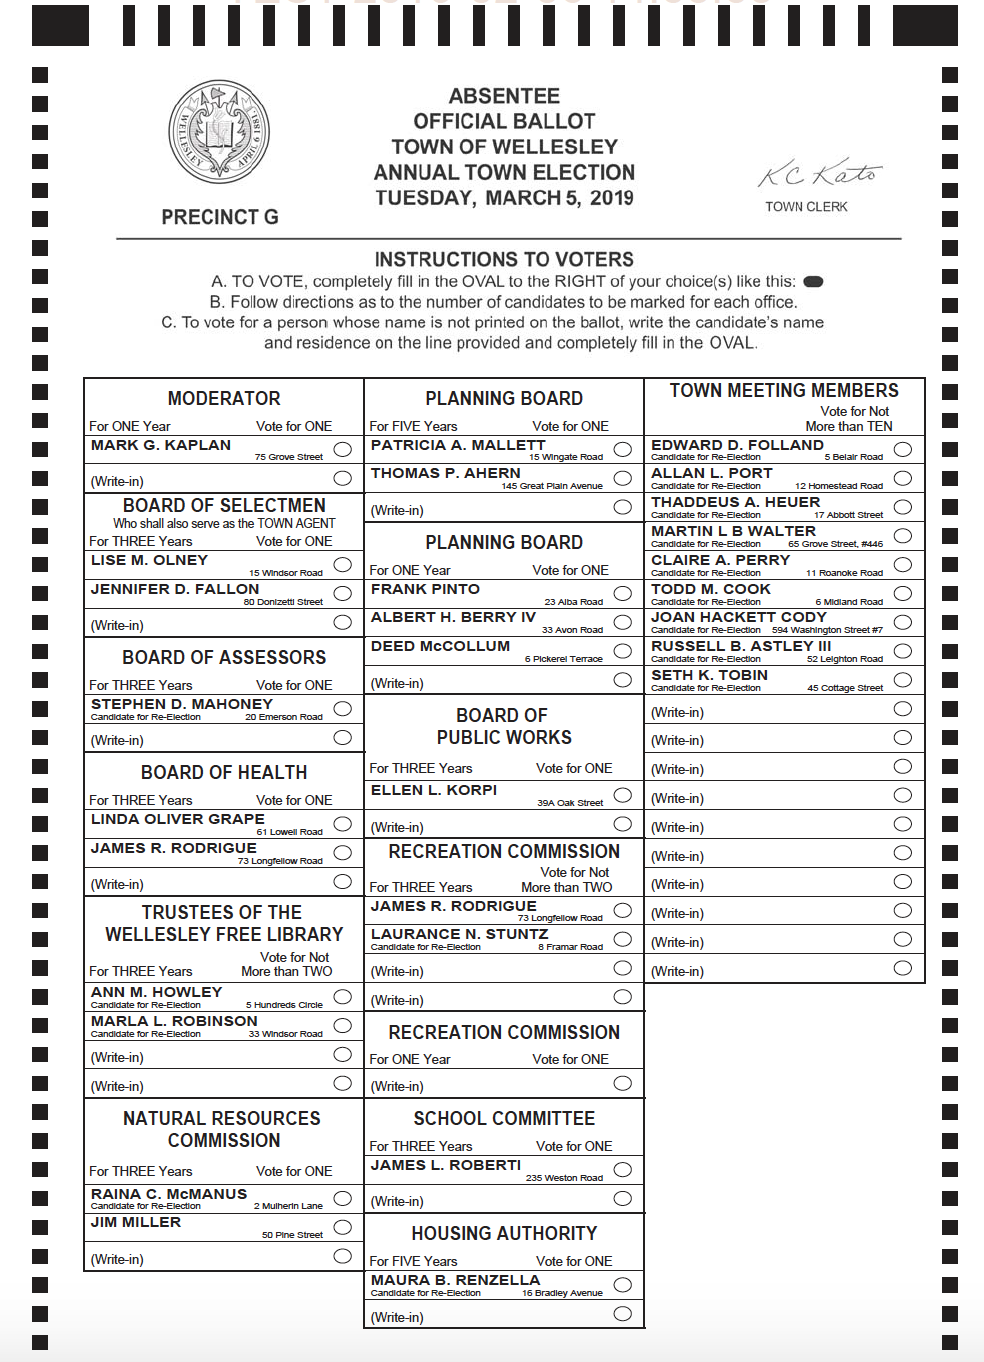 Sample Wellesley town election ballots are available The Swellesley